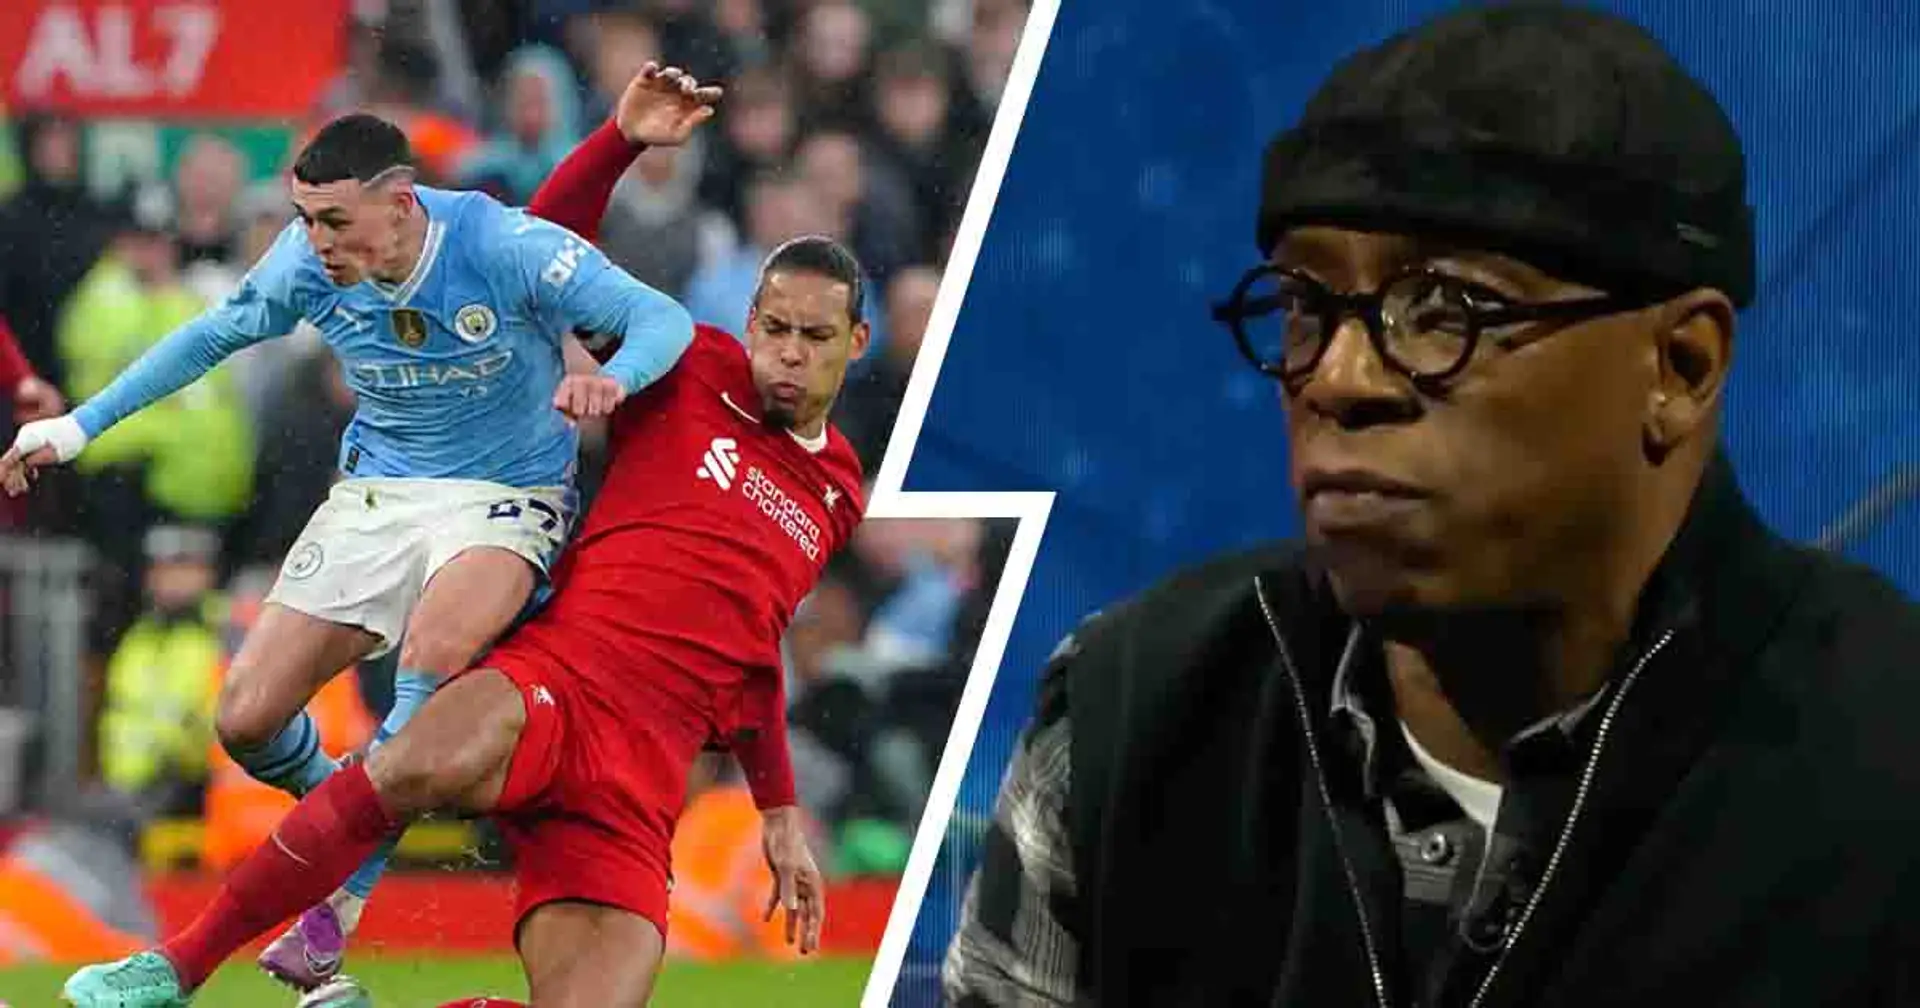 'There's 115 charges around them': Ian Wright smartly weighs in on Liverpool vs Man City rivalry debate